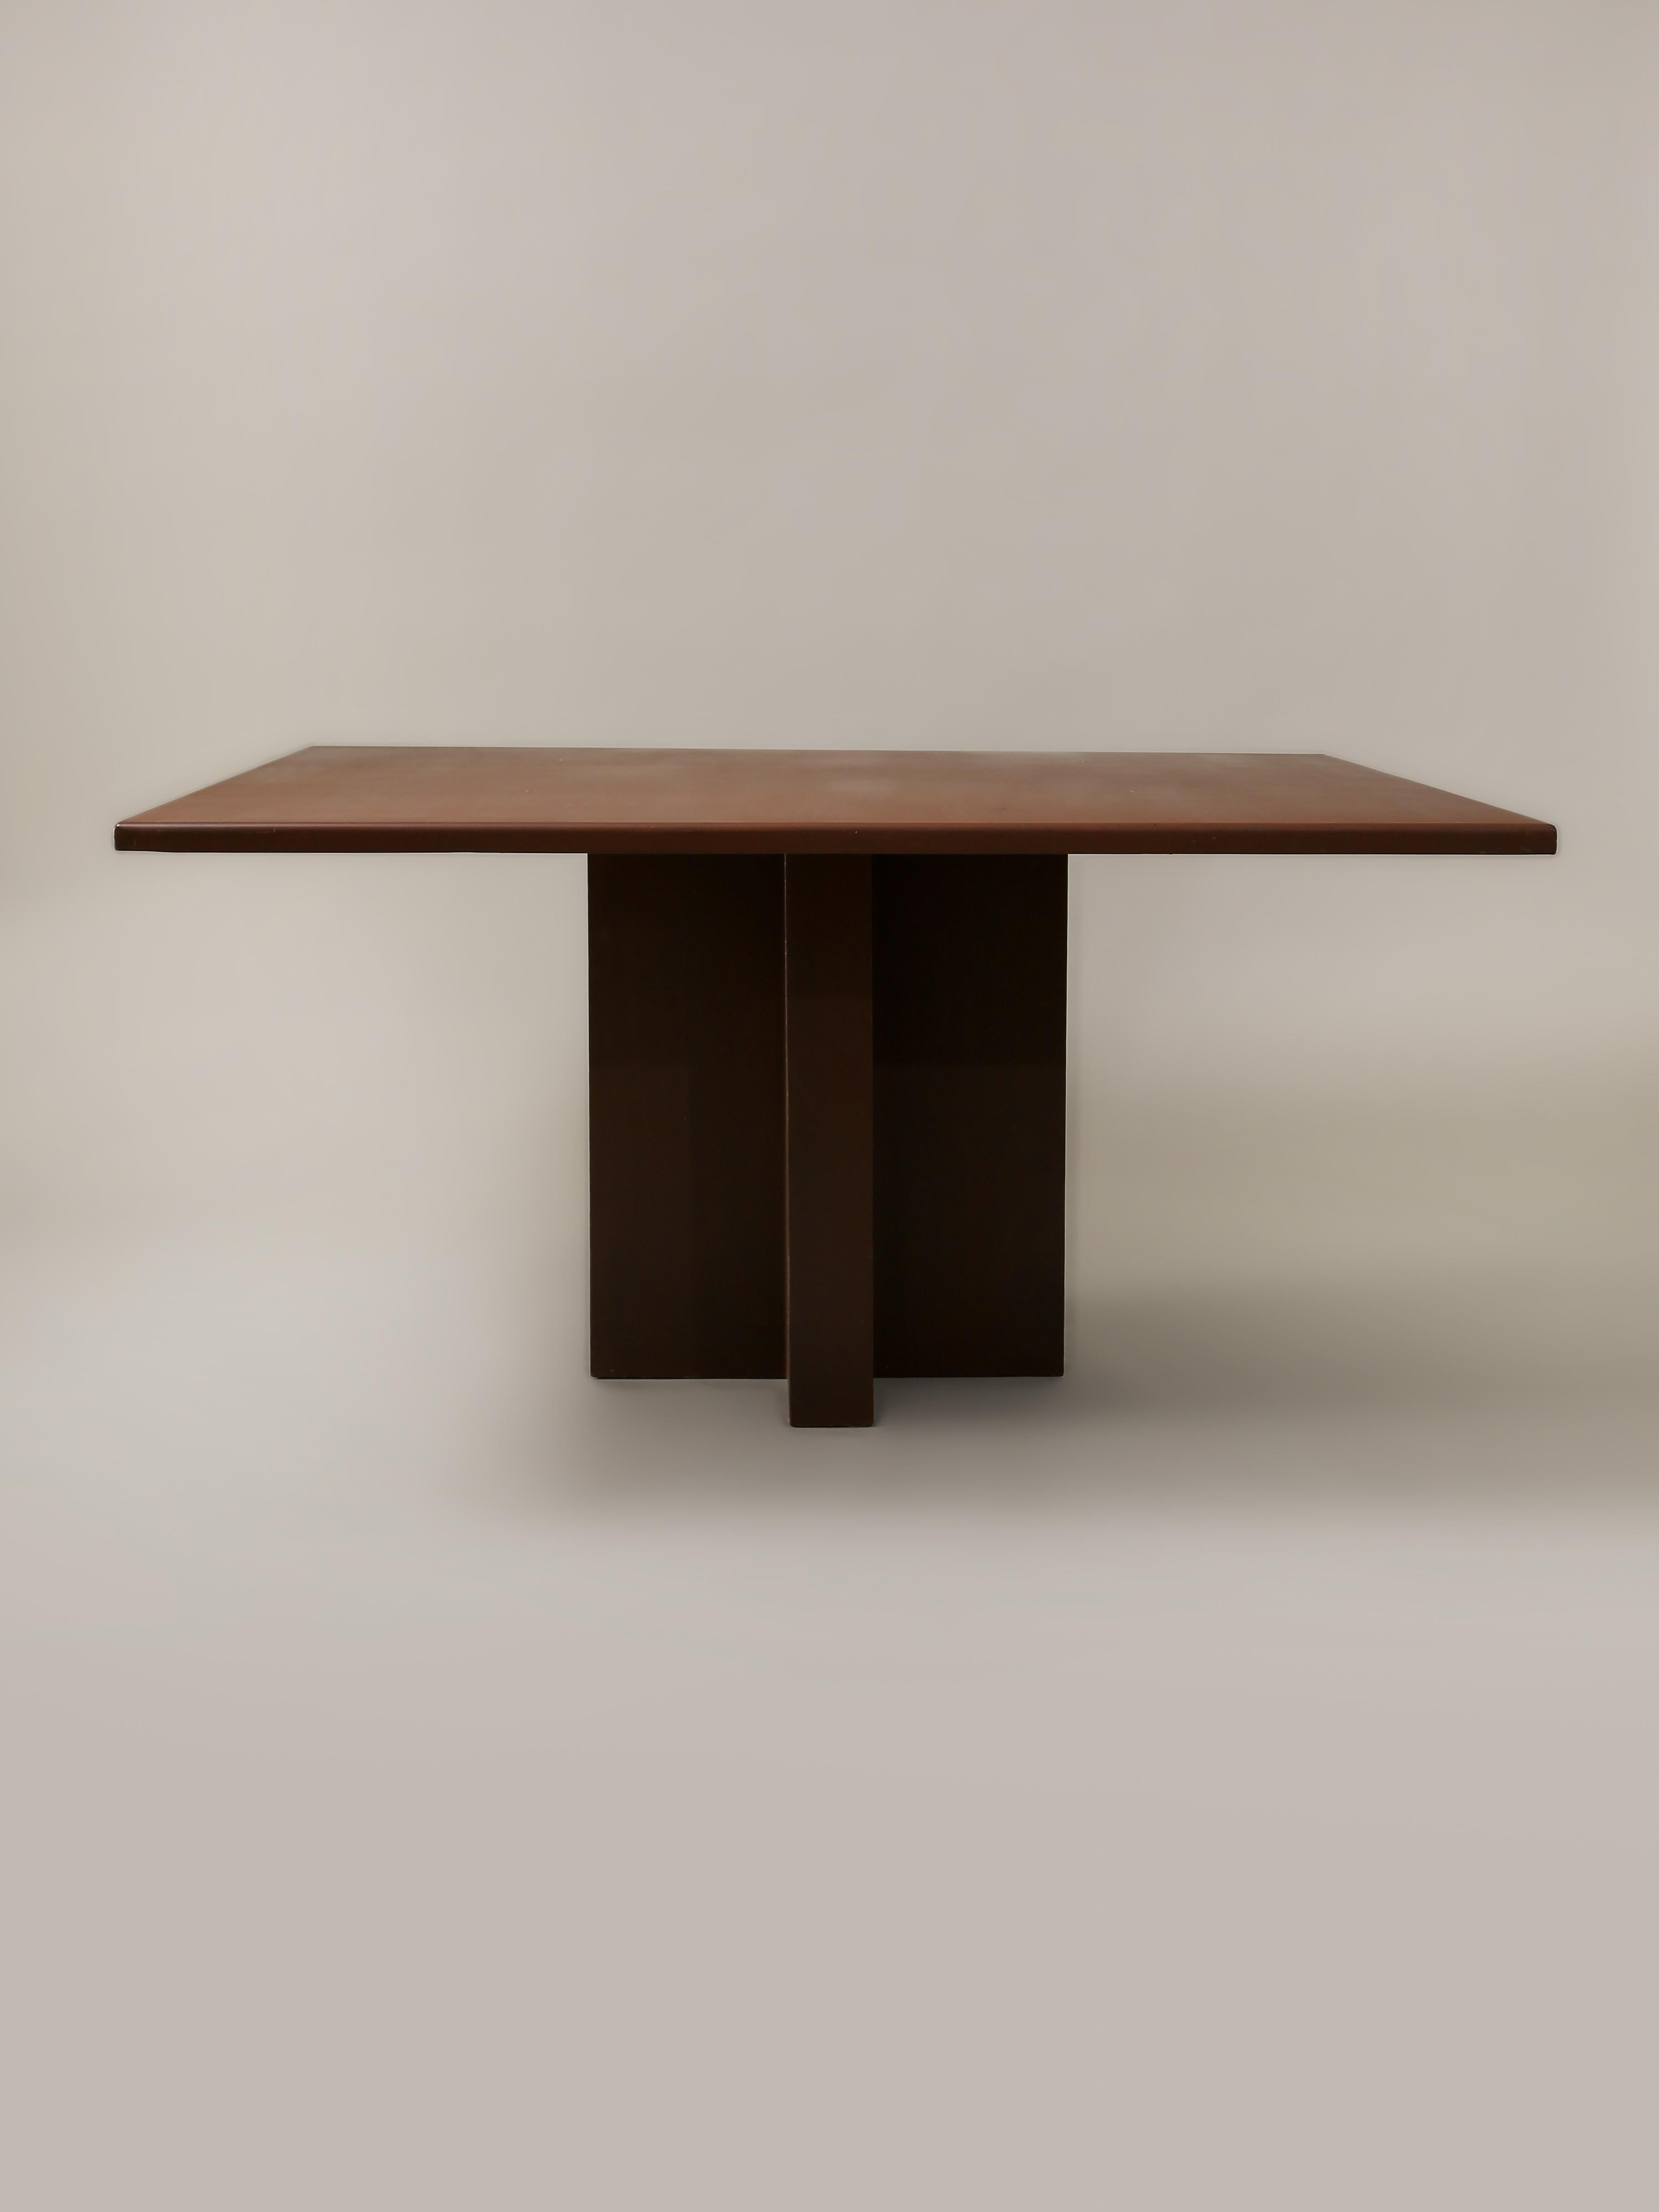 This powder-coated steel table was designed by the late landscape architect, sculptor, and furniture designer, Jack A. Chandler. The square tabletop is supported by a cross pedestal base.

Measures: Overall Width: 60